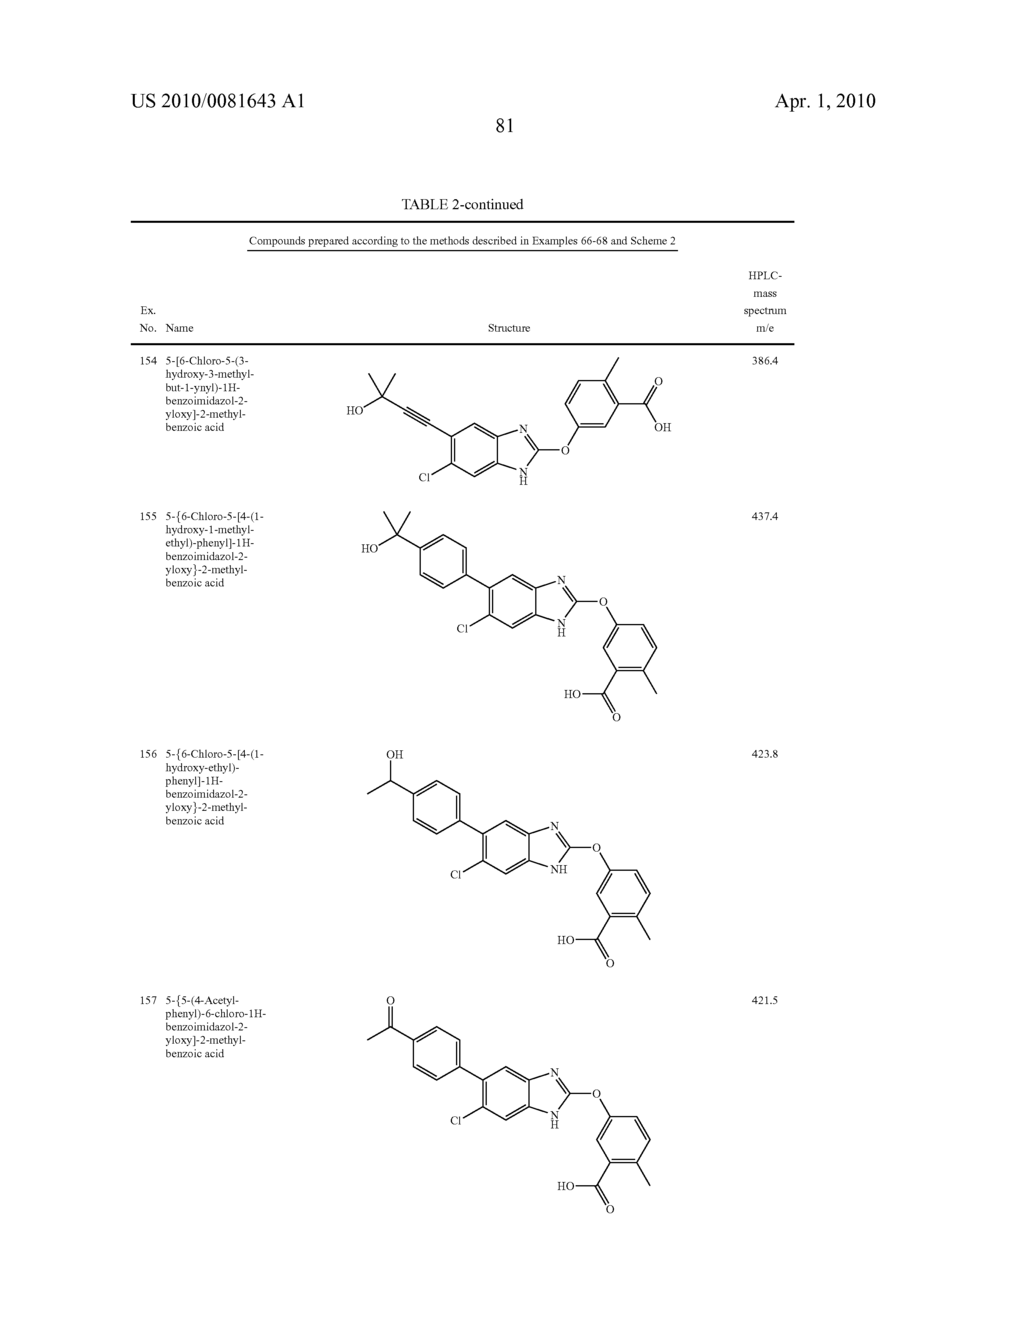 NOVEL CYCLIC BENZIMIDAZOLE DERIVATIVES USEFUL AS ANTI-DIABETIC AGENTS - diagram, schematic, and image 82